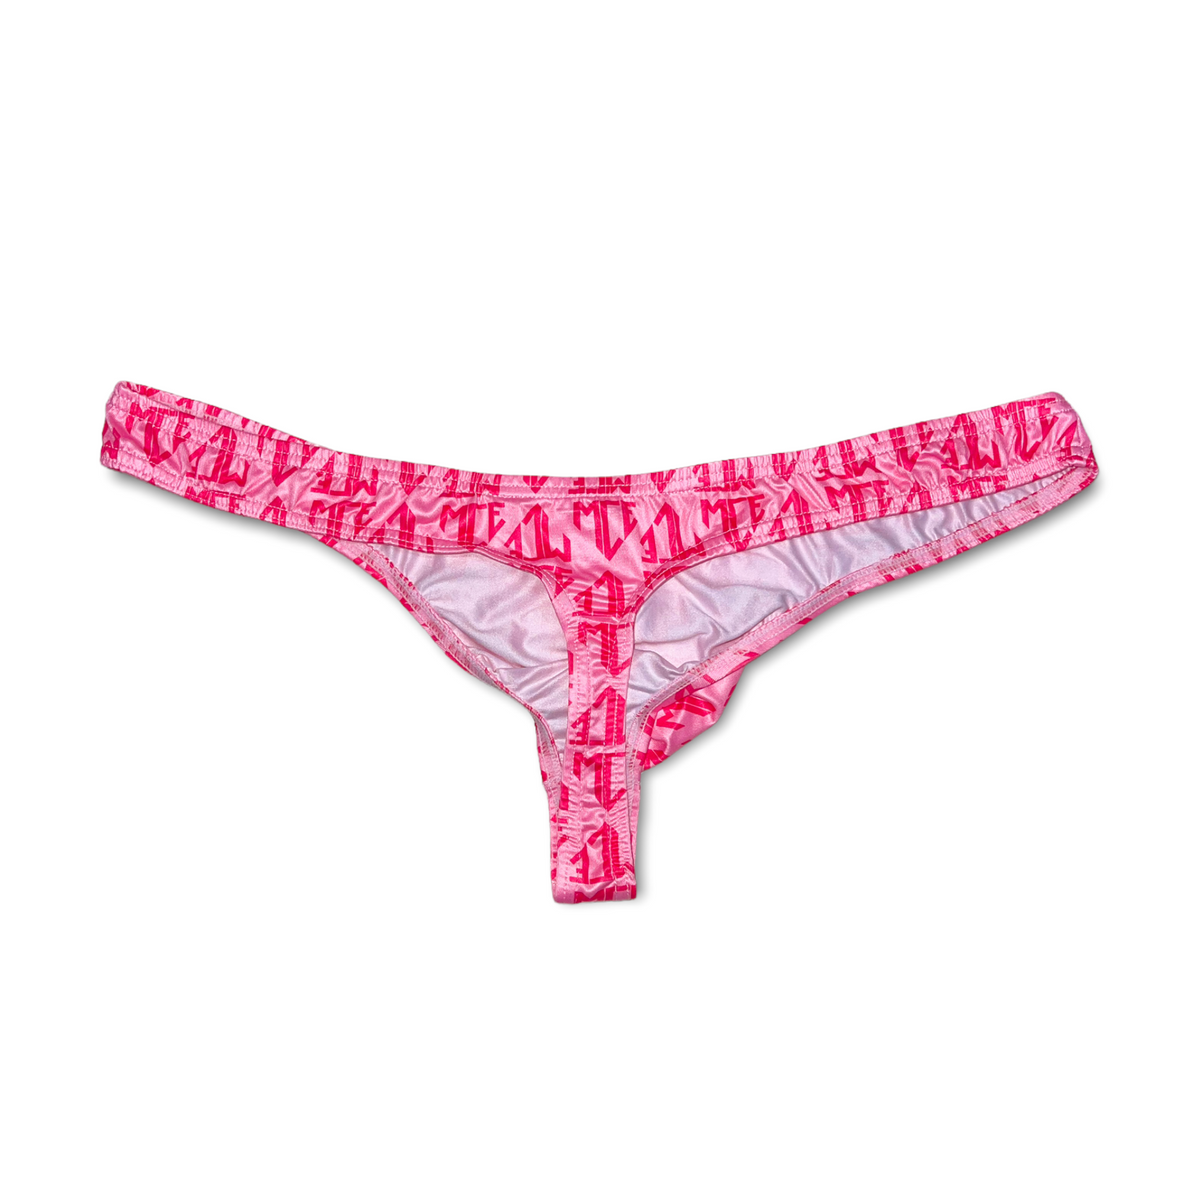 Victoria Secret Panty Thong Small White Pink Logo Solid New